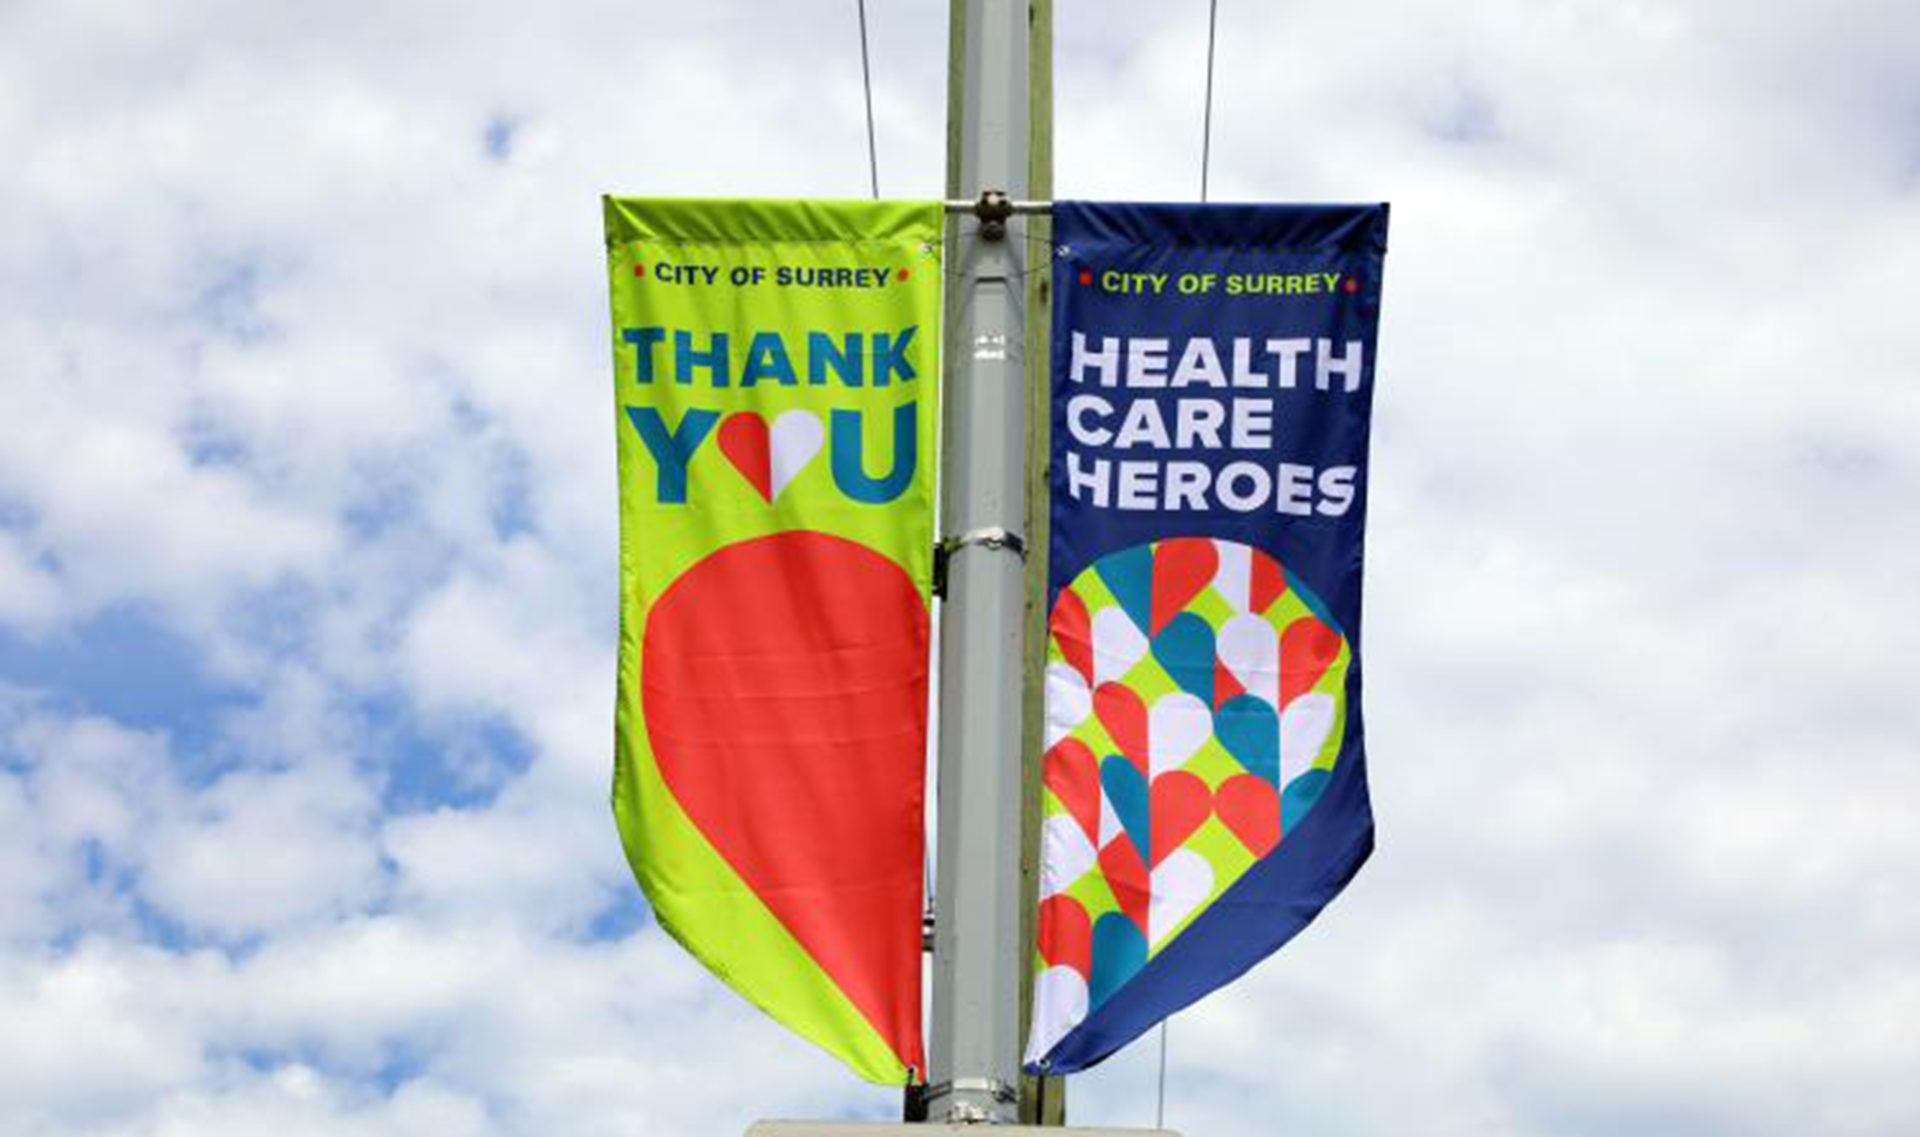 City-of-Surrey-Healthcare-Banners